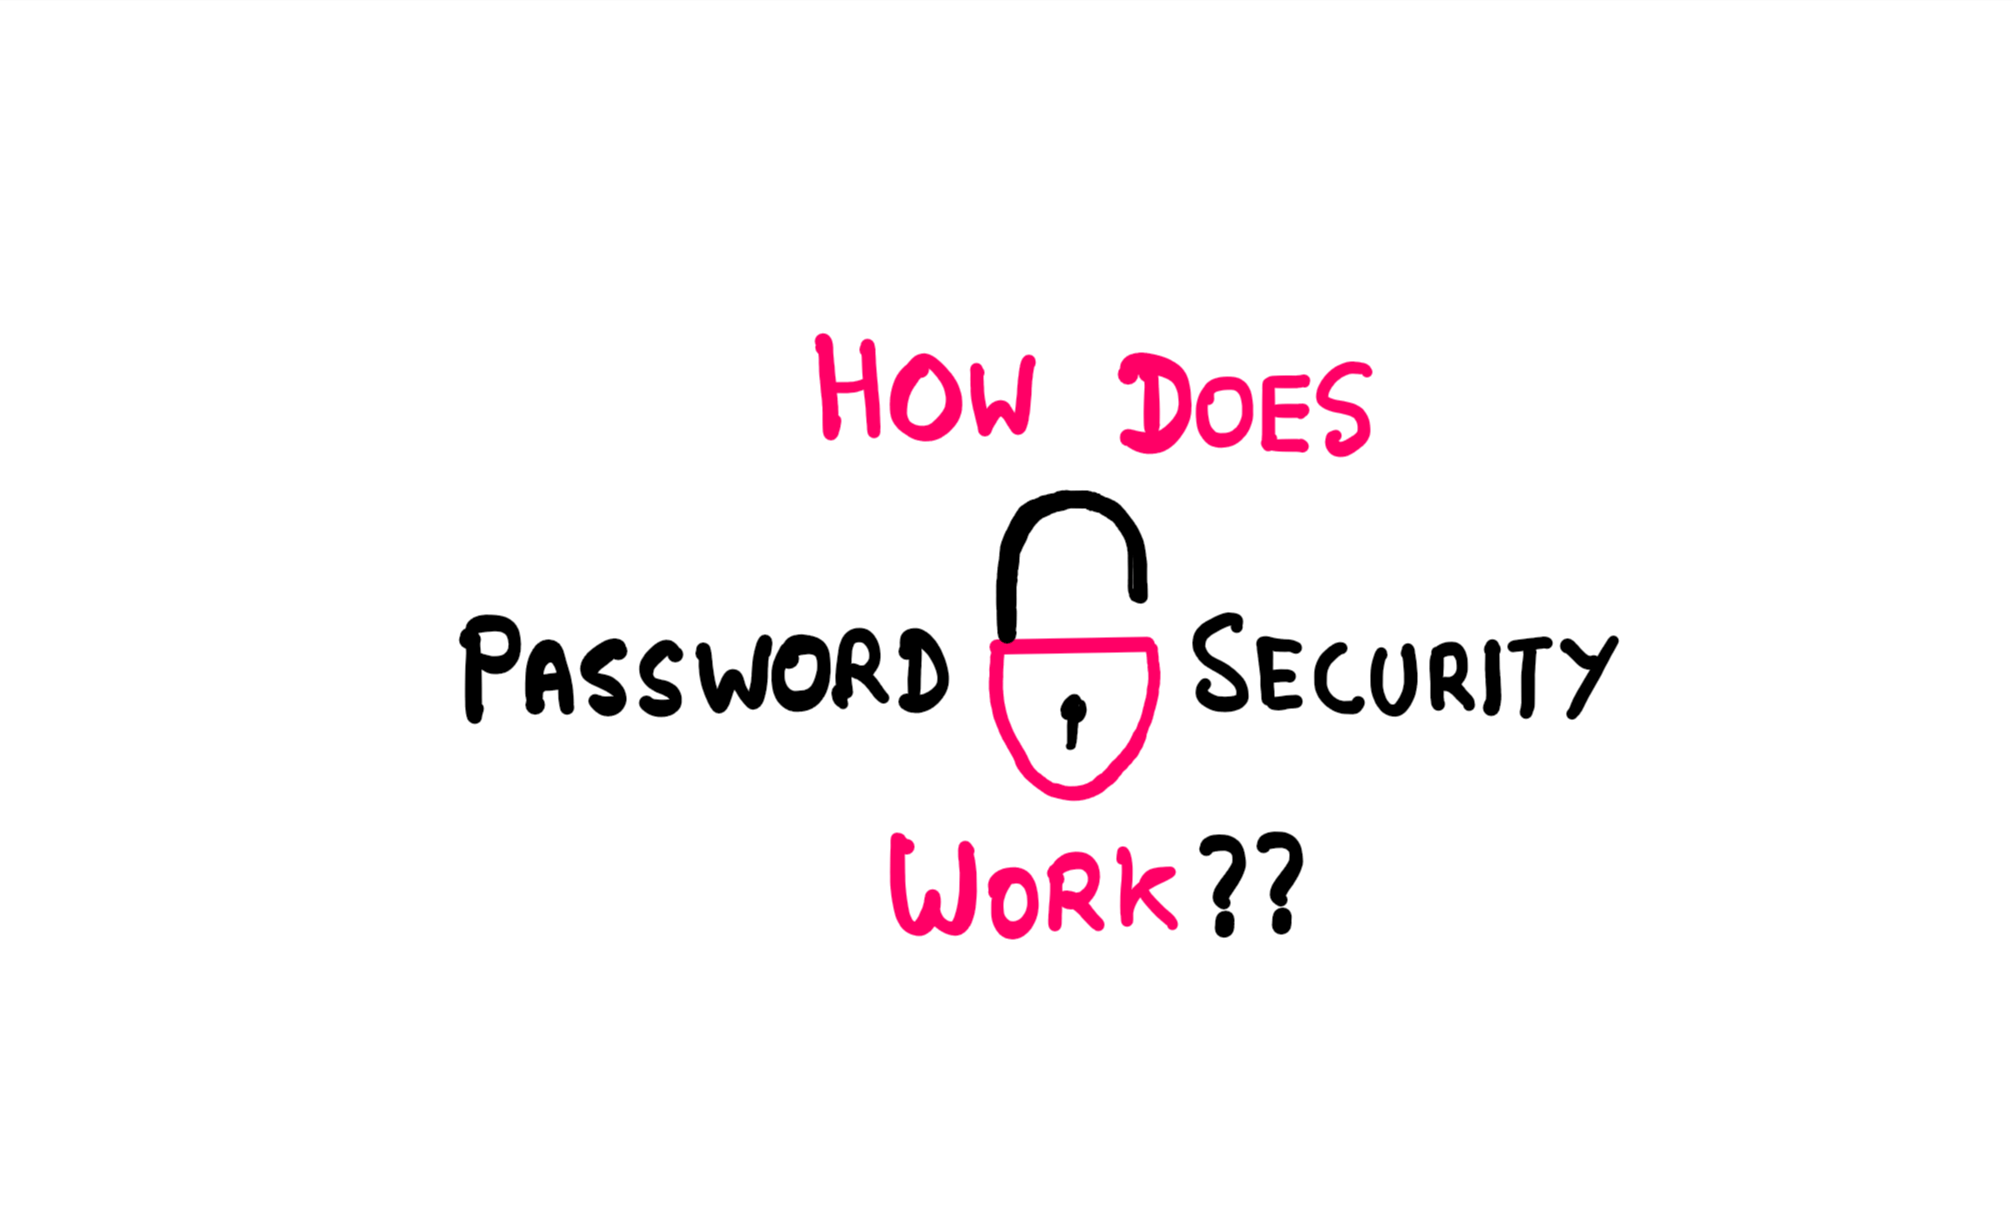 Cracking The Code: How Salt & Pepper Secure Passwords - An illustration showing the text "How Does Password Security Work?" In between the words 'password' and 'security', there seems to be an open lock.